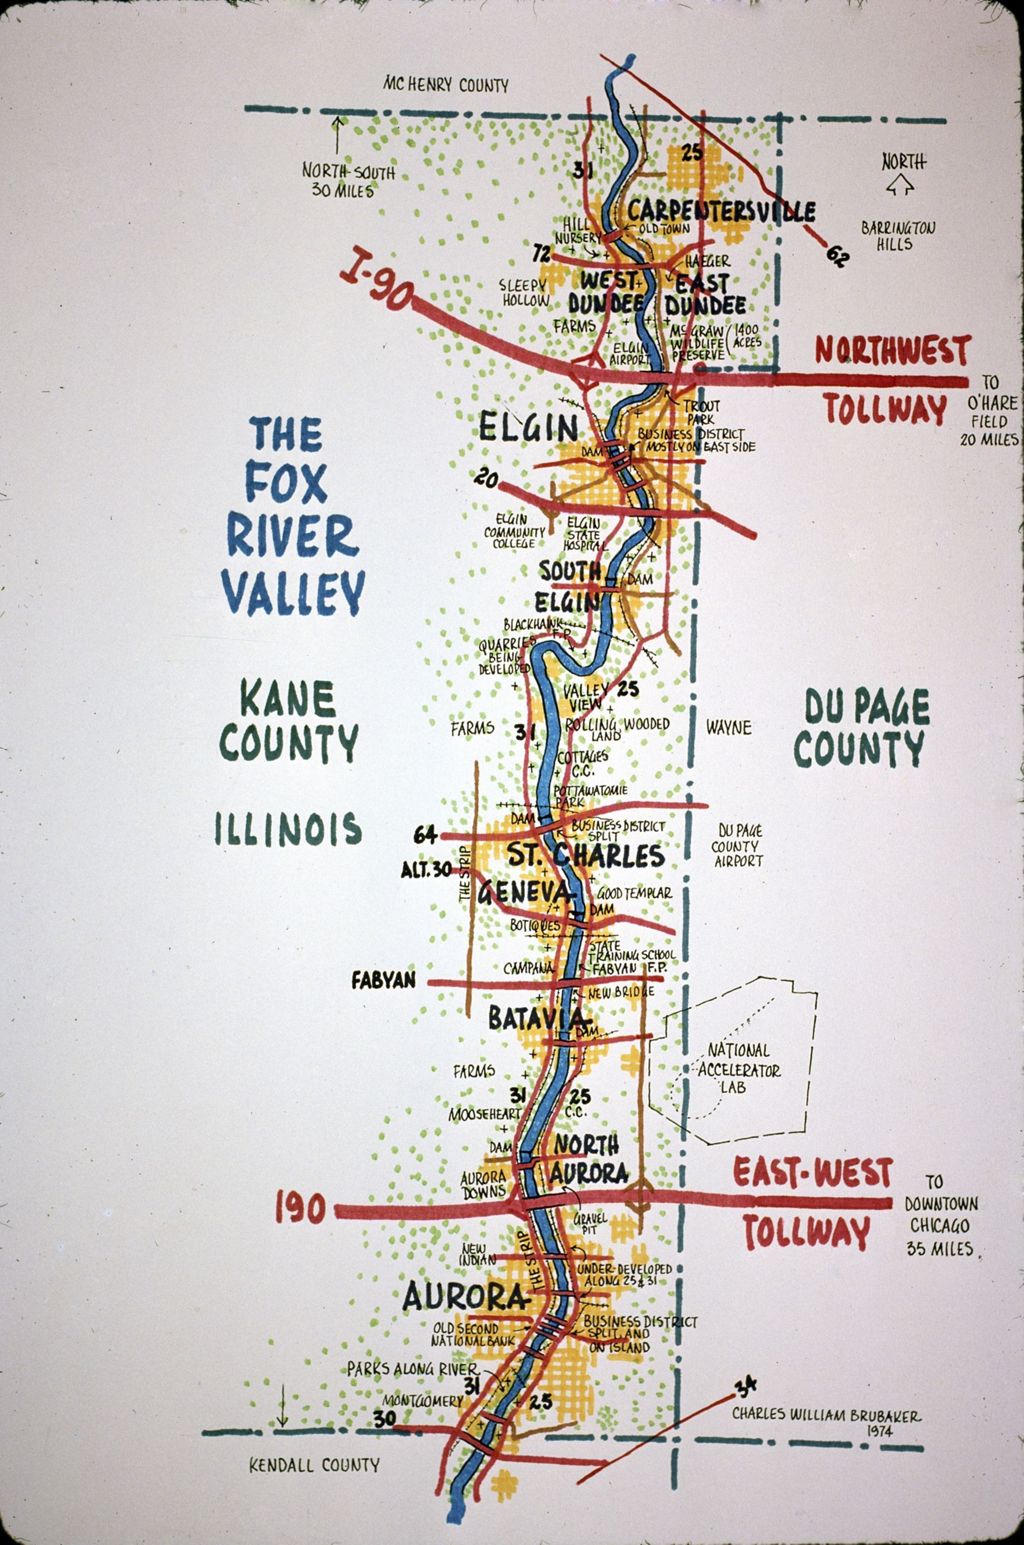 Miniature of Fox River Valley, transportation and development